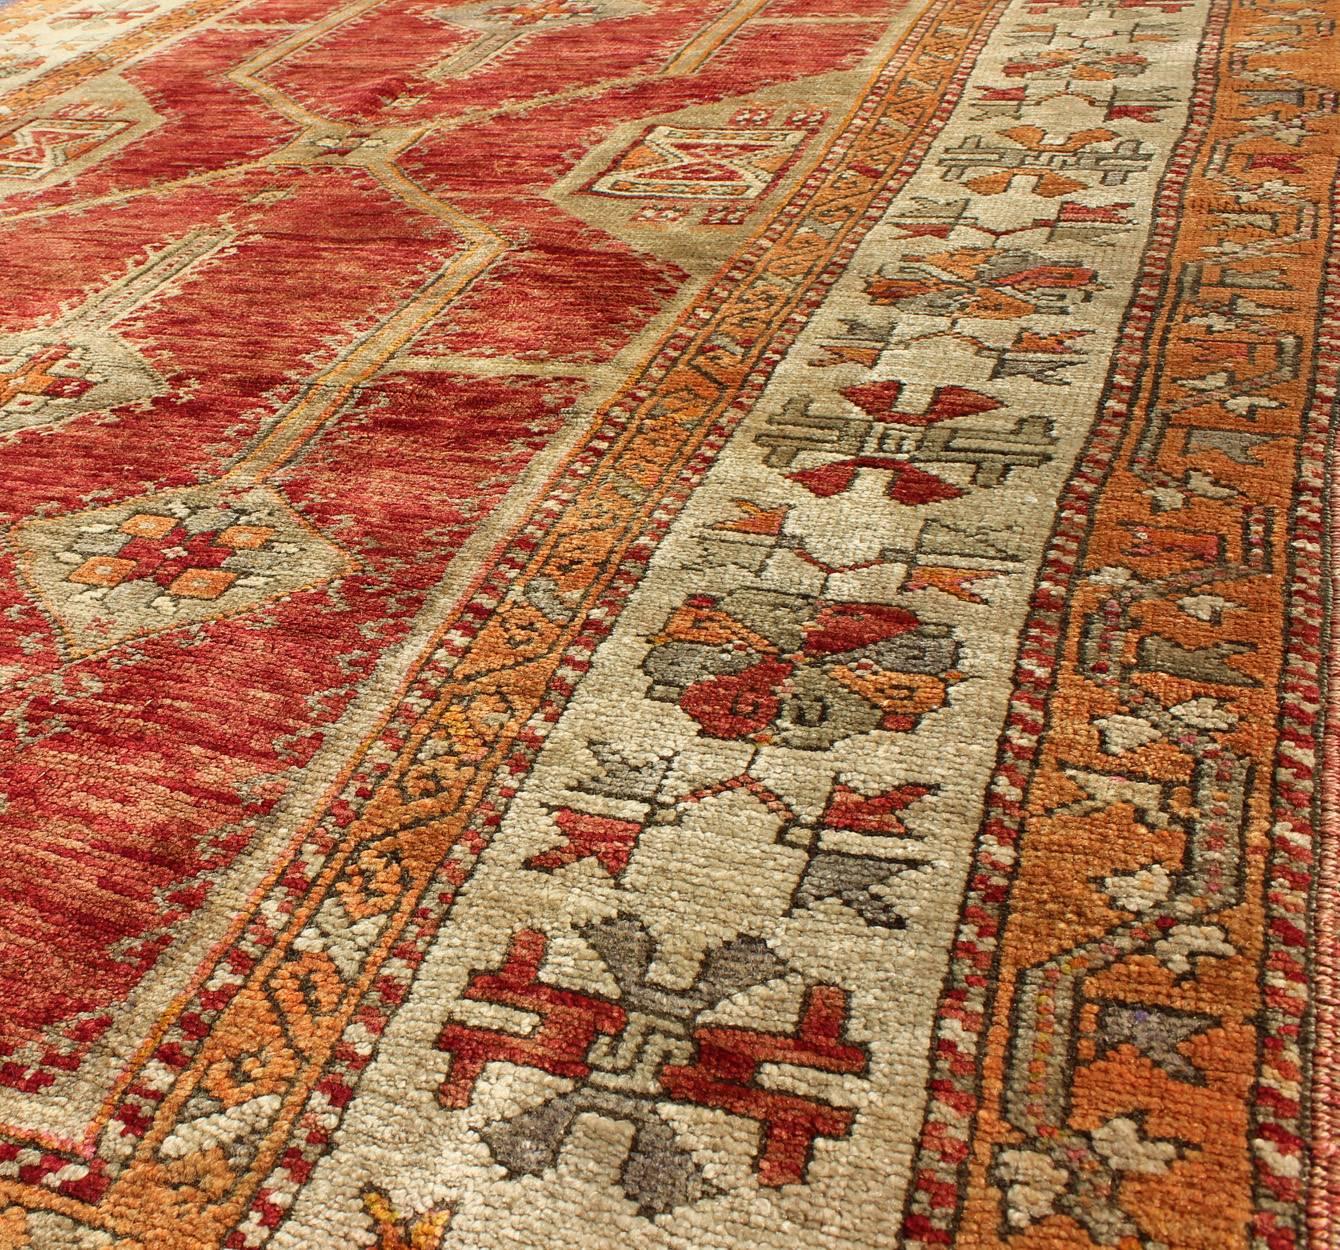 Wool Antique Turkish Oushak Rug With Geometric Design in Red, Light Green & L. Orange For Sale